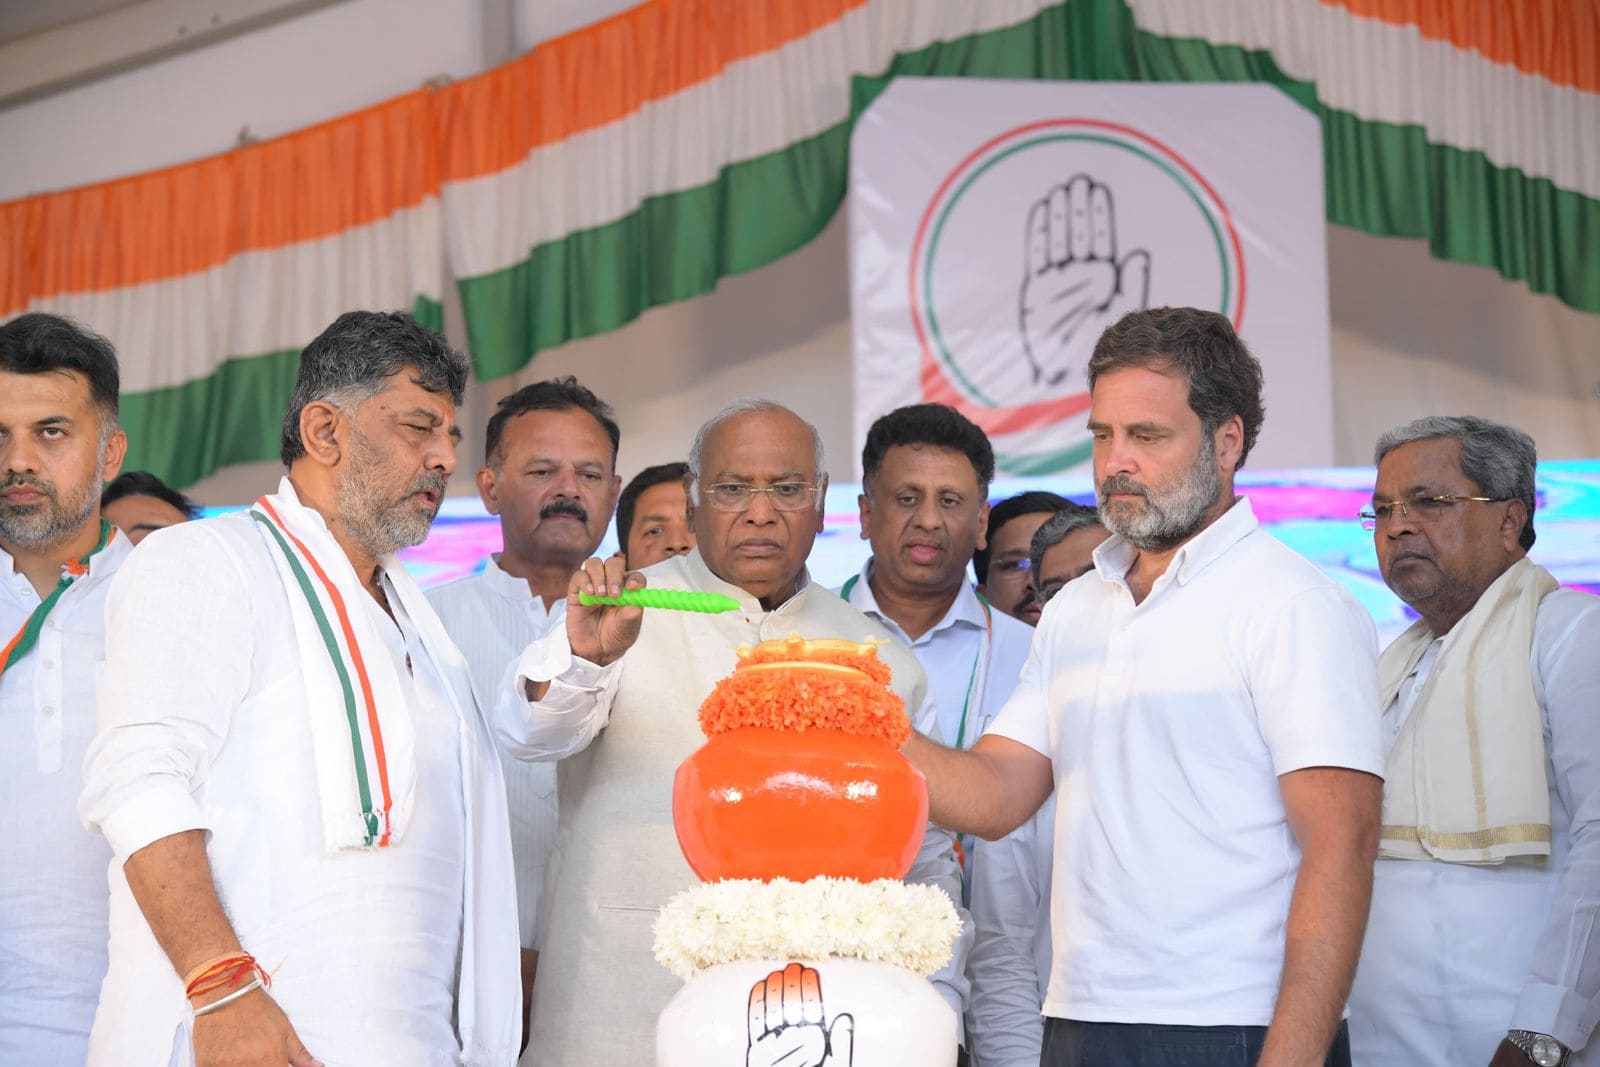 Rahul Gandhi campaigning for the party. AICC president Mallikarjun Kharge and senior party leaders in Karnataka are also seen. (X)